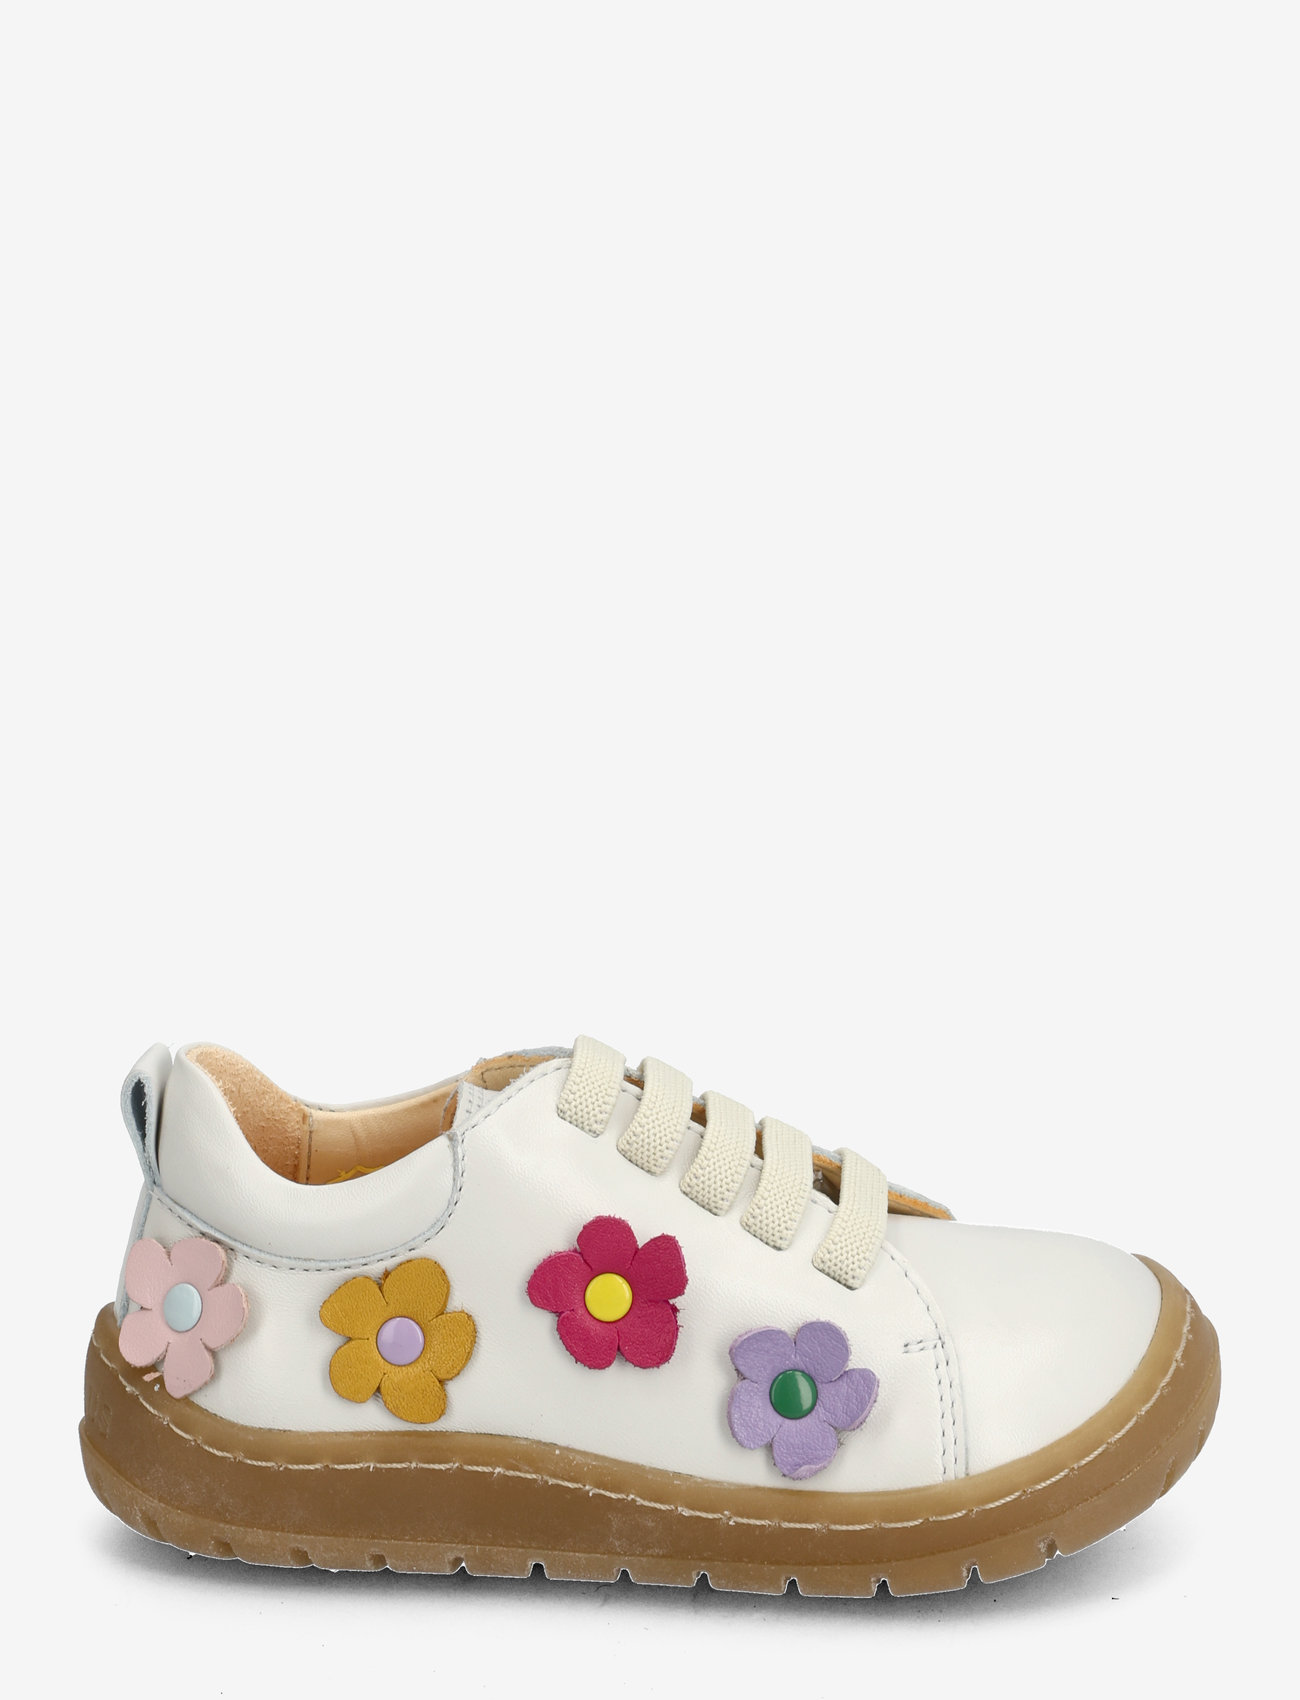 ANGULUS - Shoes - flat - with lace - vasaros pasiūlymai - 1493/a002 off white/flowers - 1